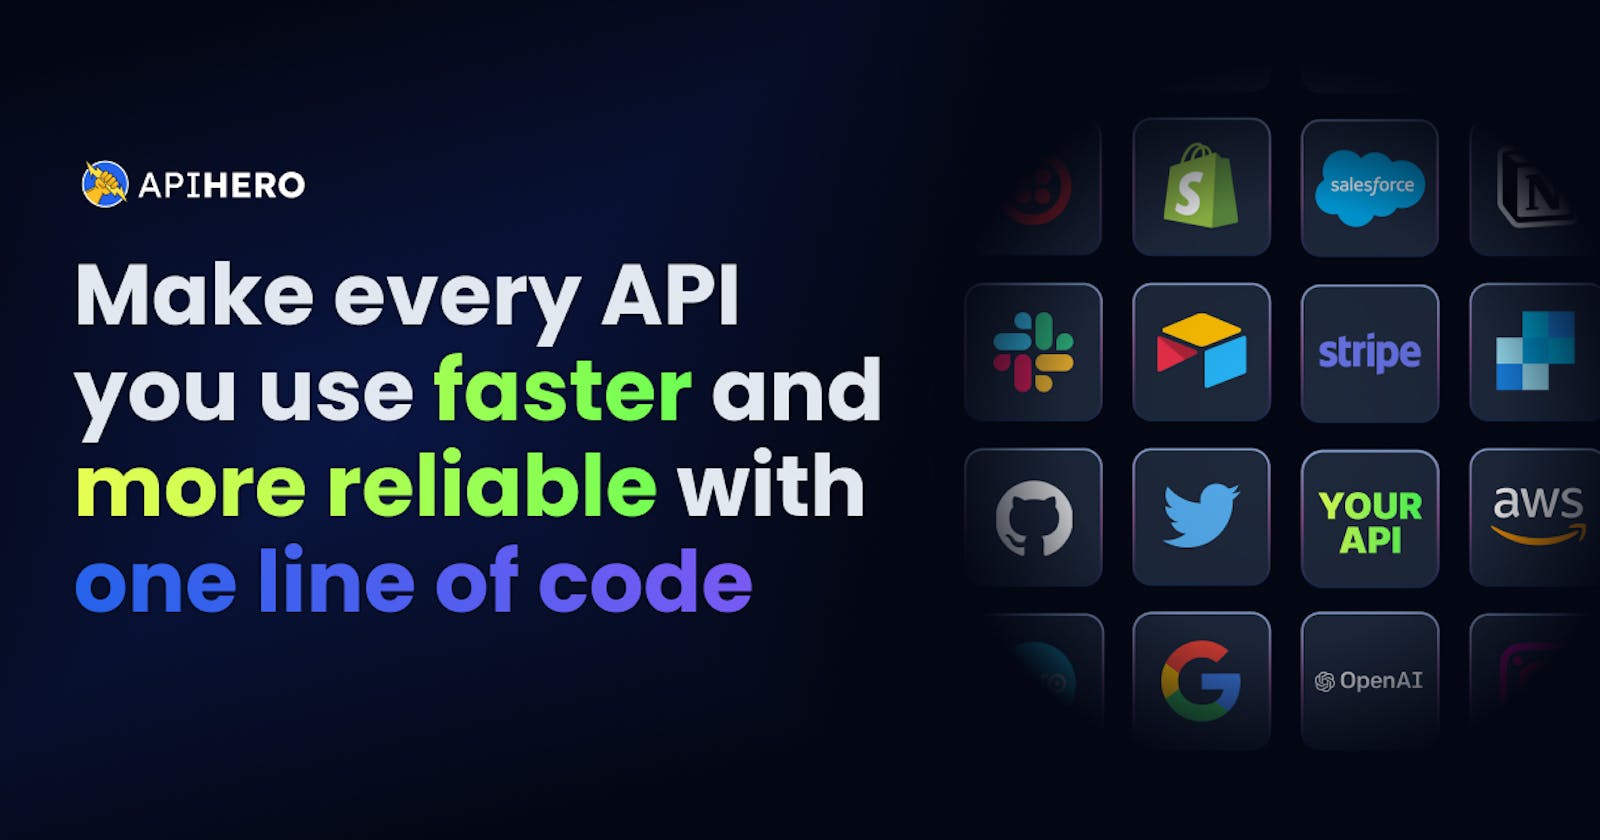 Introducing API Hero: an open-source proxy that makes every API you use faster and more reliable